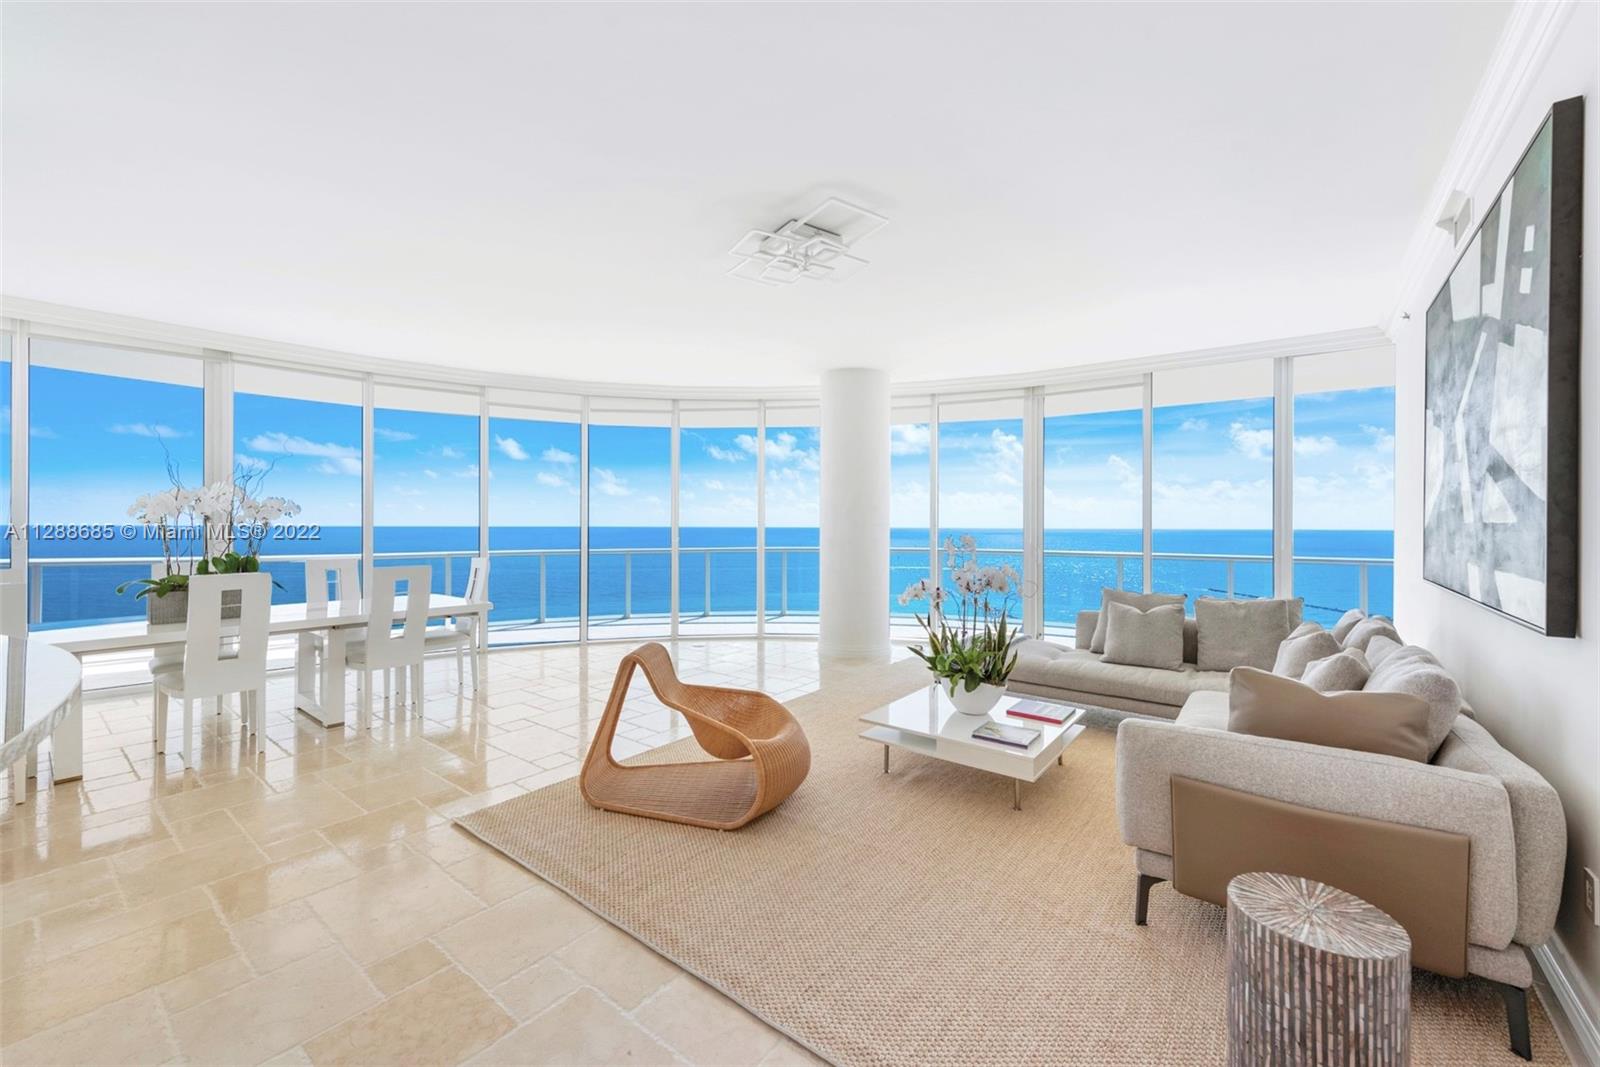 This incredible residence at the iconic Continuum is the only premium-sized 3-bedroom currently available with truly permanently unobstructed views-no doubt a generational property.The rare offering nestled above the Atlantic Ocean at the southernmost point of Miami Beach boasts an enormous 715 SF terrace on the southeast rotunda,basking in panoramic jaw-dropping views.From Fisher Island and parading cruise ships,to S. Pointe Park, all the way up the Miami Beach coast as far as the eye can see.Primary suite features his+hers baths and 3 WI closets.Lutron LED lighting/thermostats.Possible to convert to a 4 bed.Irreplaceable 13 acre private beachfront oasis includes 3 level gym/spa, lap+2 lagoon pools, beach club, 3 Har-Tru tennis courts, restaurant, concierge, biometric entry+24hr security.